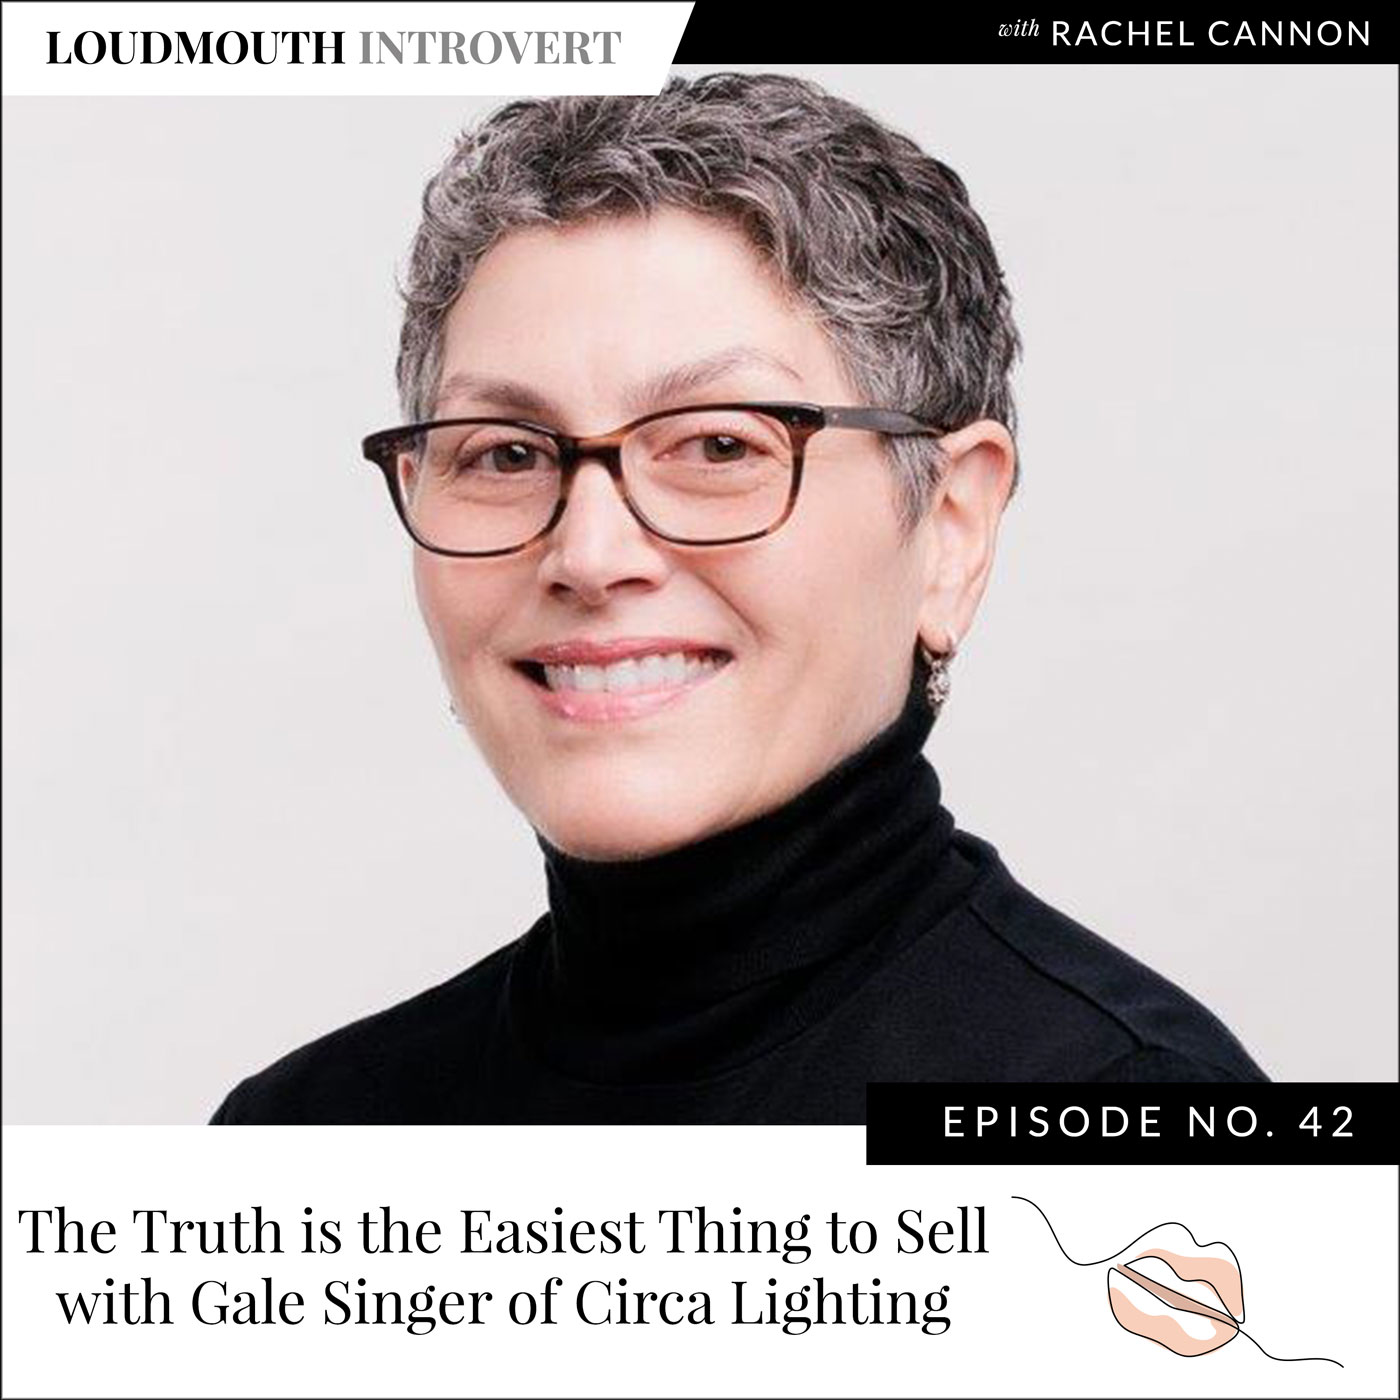 The Truth is the Easiest Thing to Sell with Gale Singer of Circa Lighting